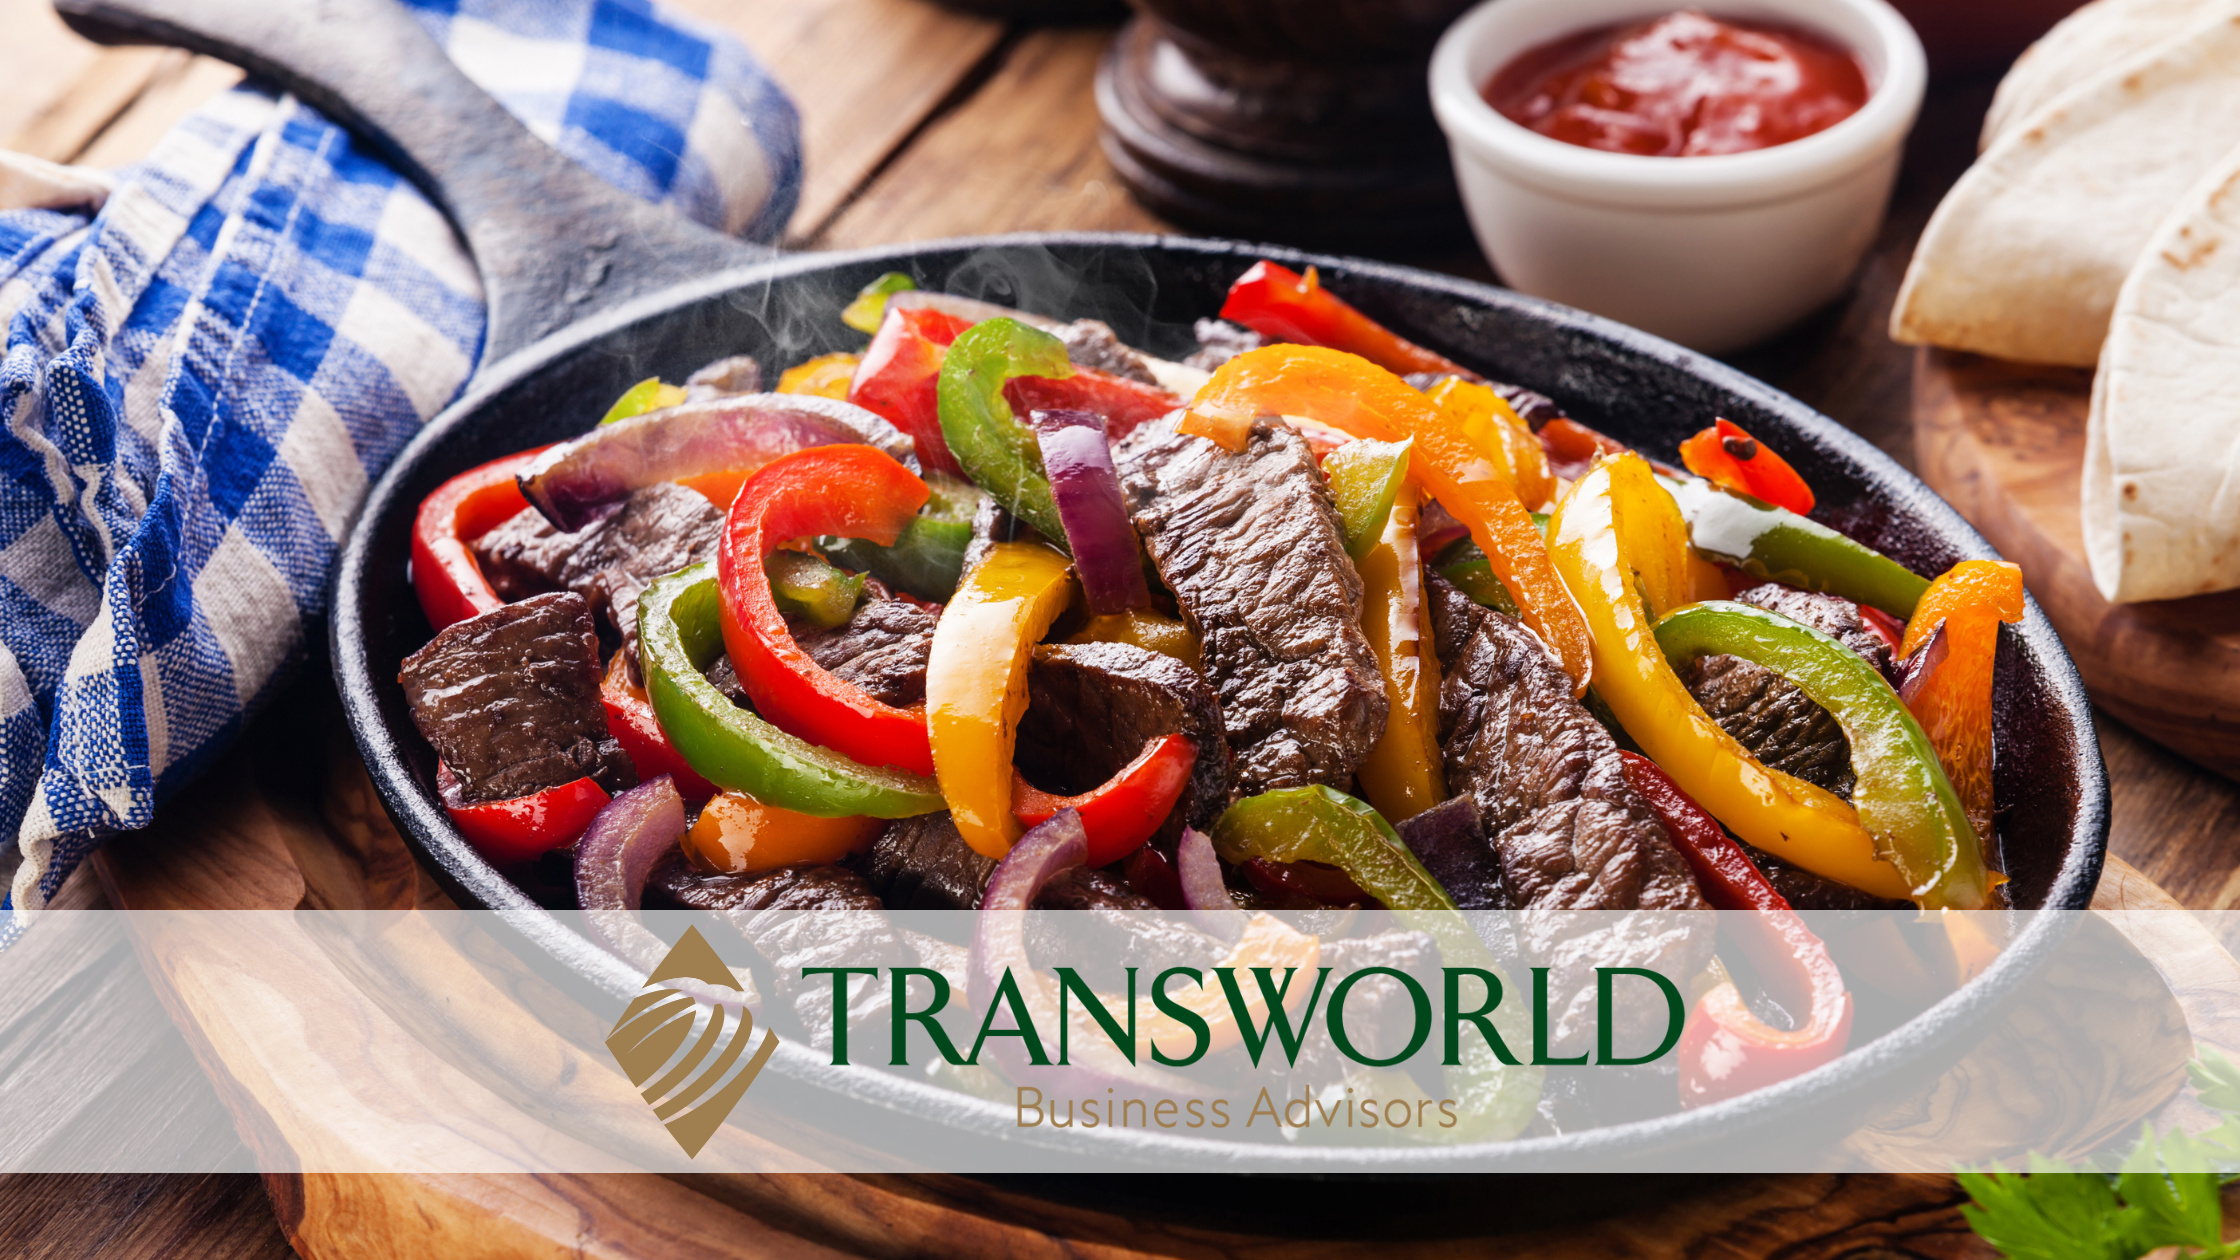 Fajita Catering and Delivery Franchise in West Houston